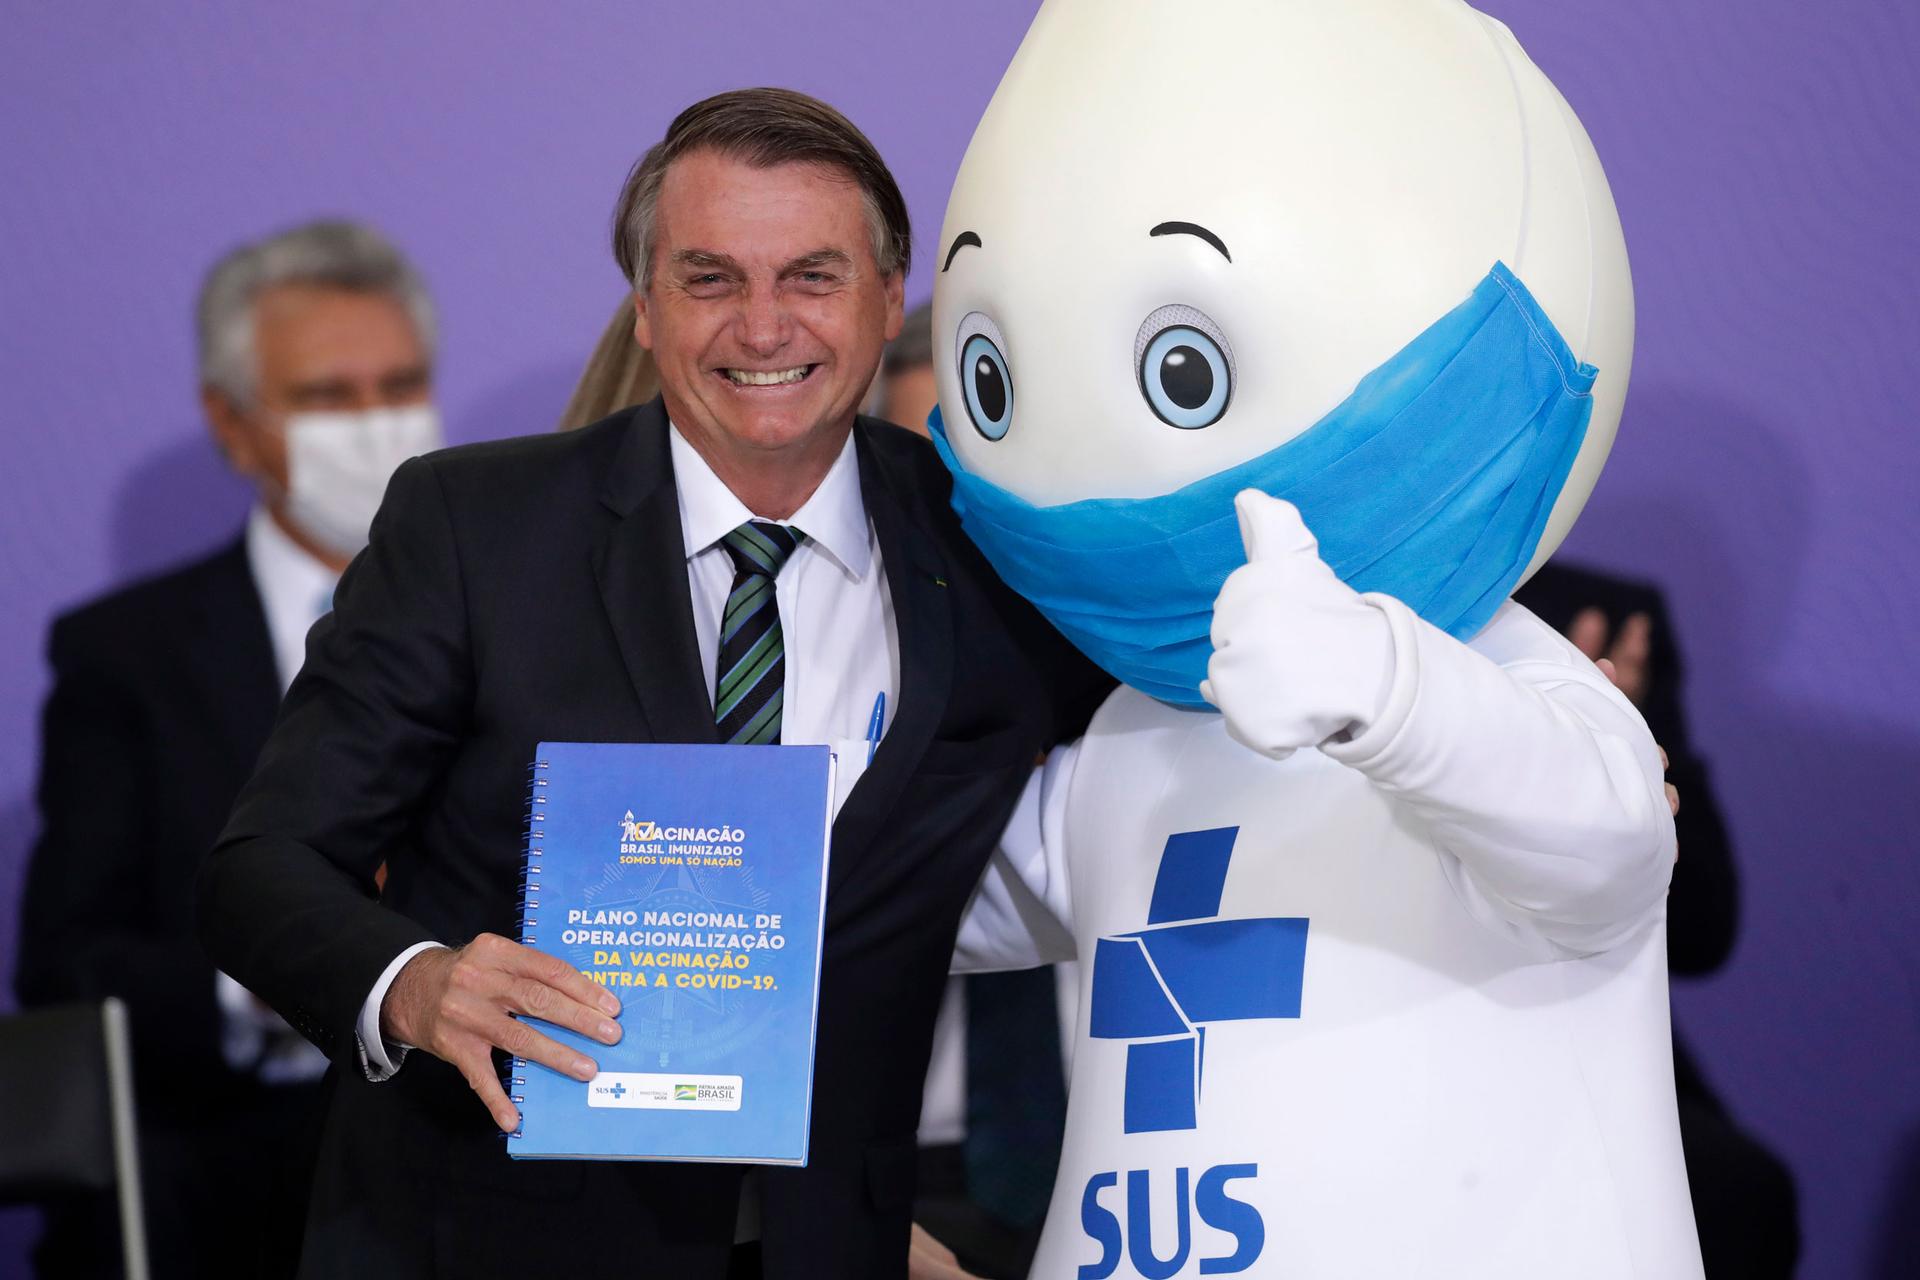 In this Dec. 16, 2020 file photo, Brazil's President Jair Bolsonaro poses for photos with the mascot of the nation's vaccination campaign, named 